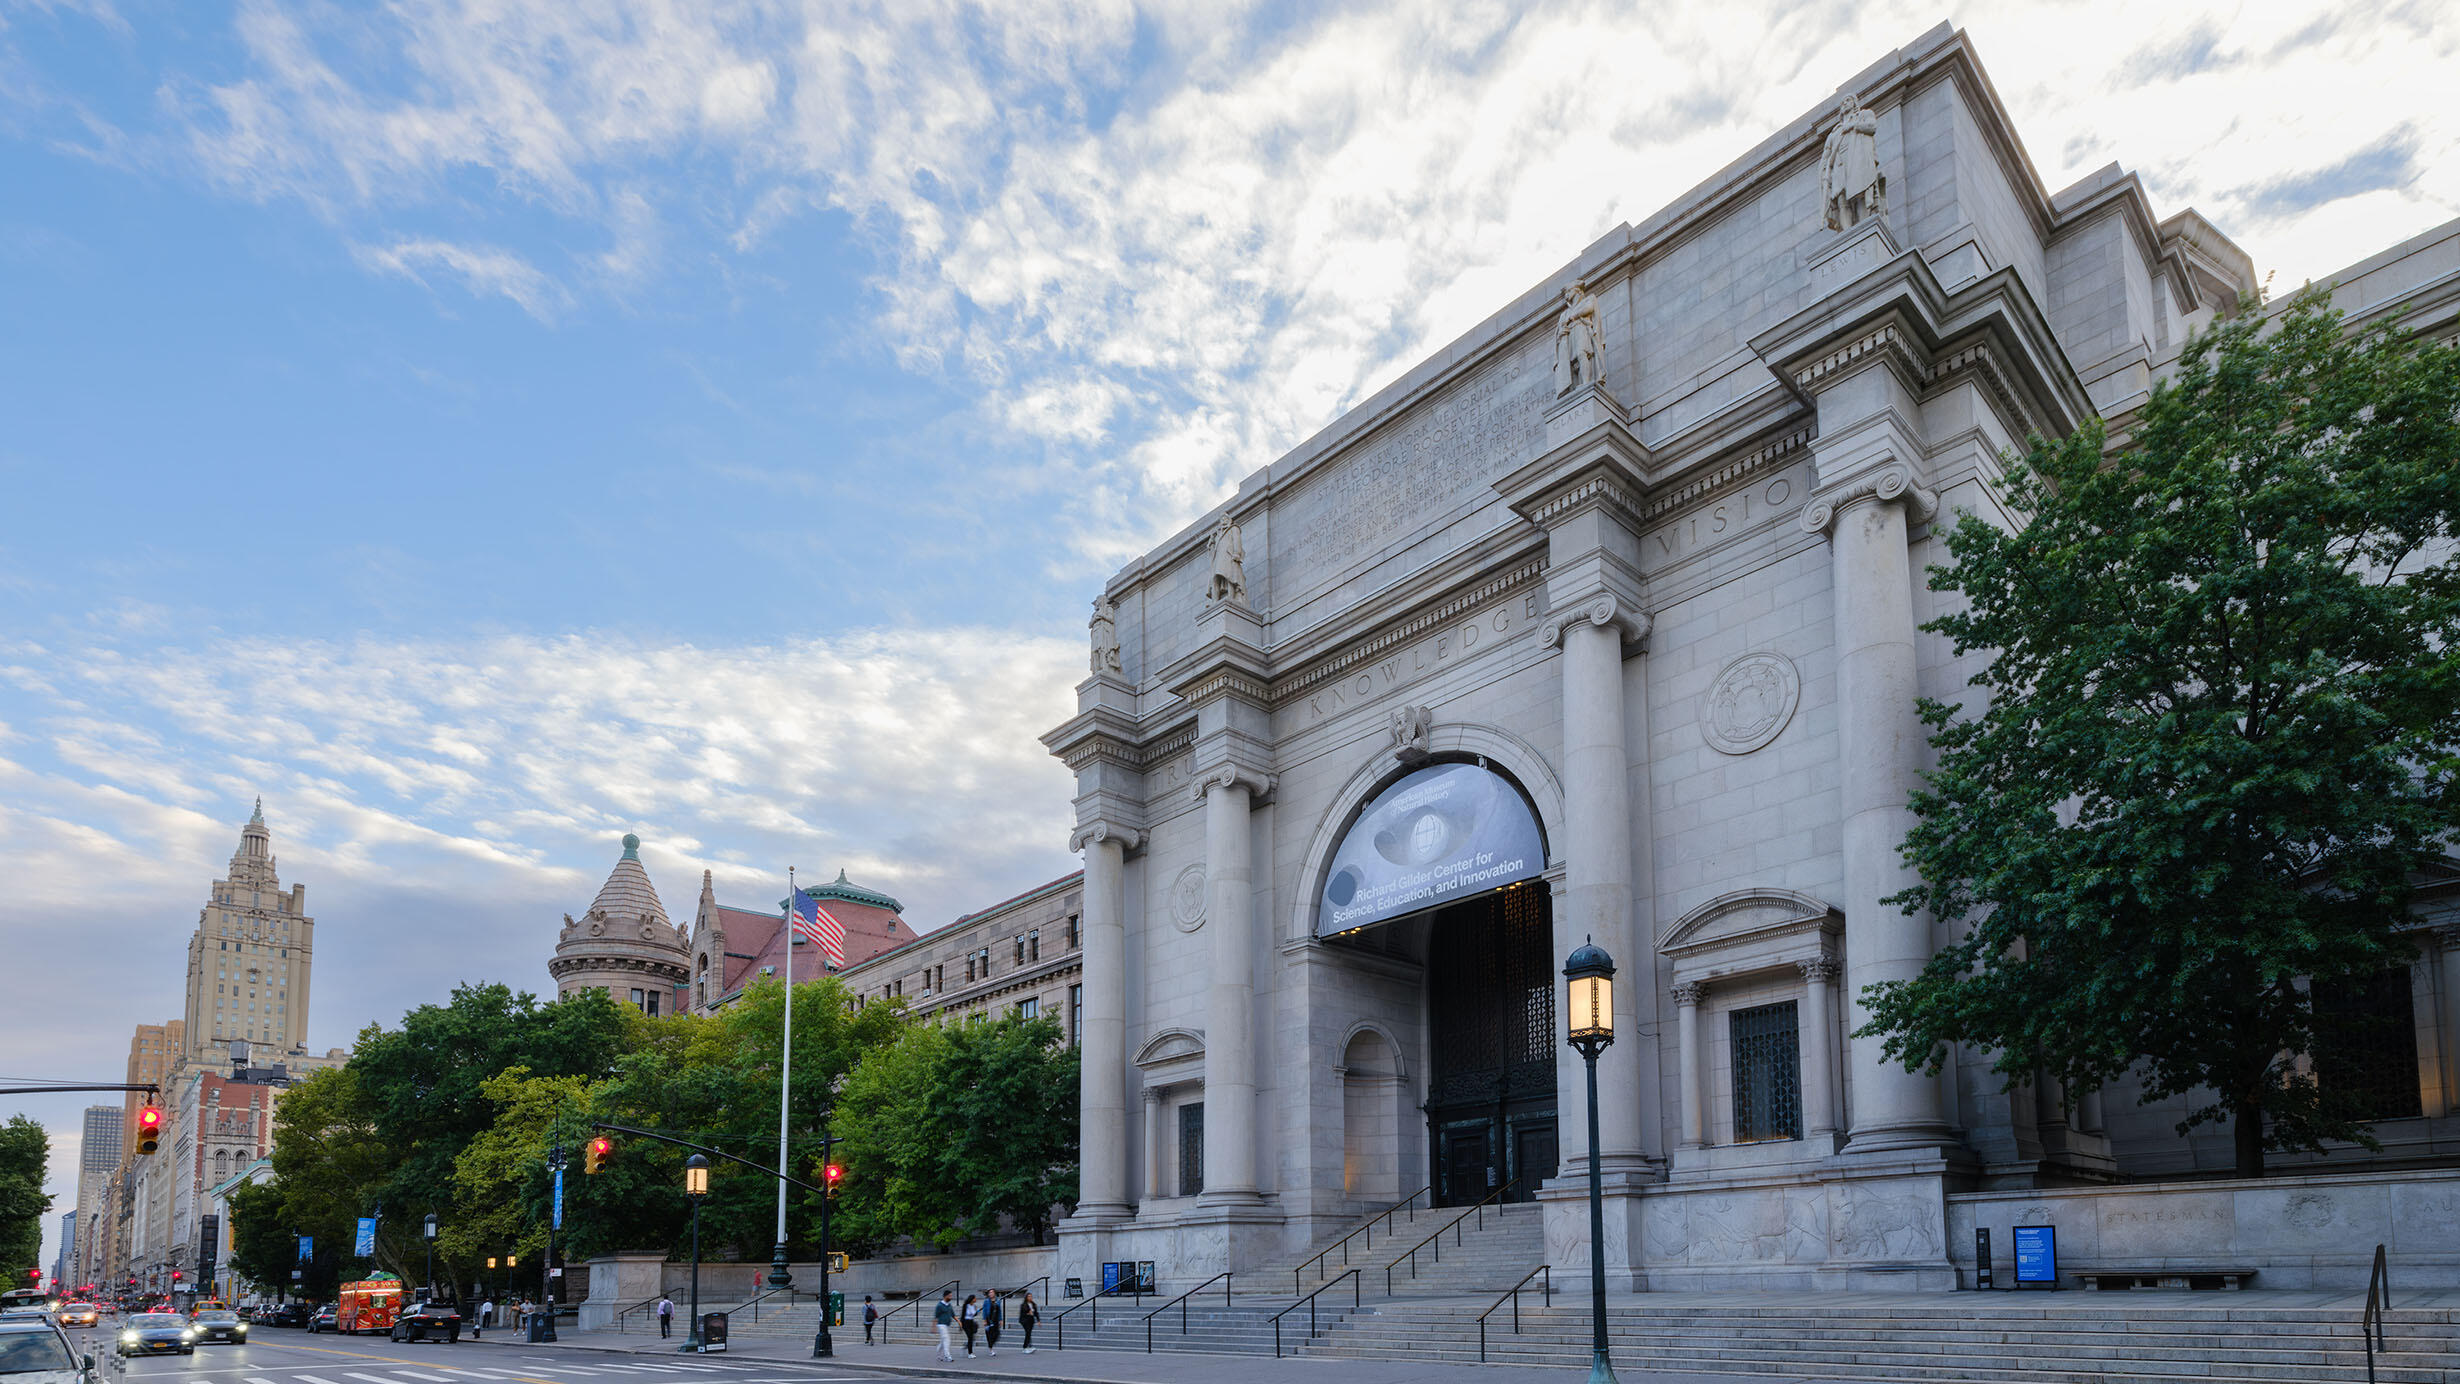 The Central Park West entrance of the American Museum of Natural History in the daytime.